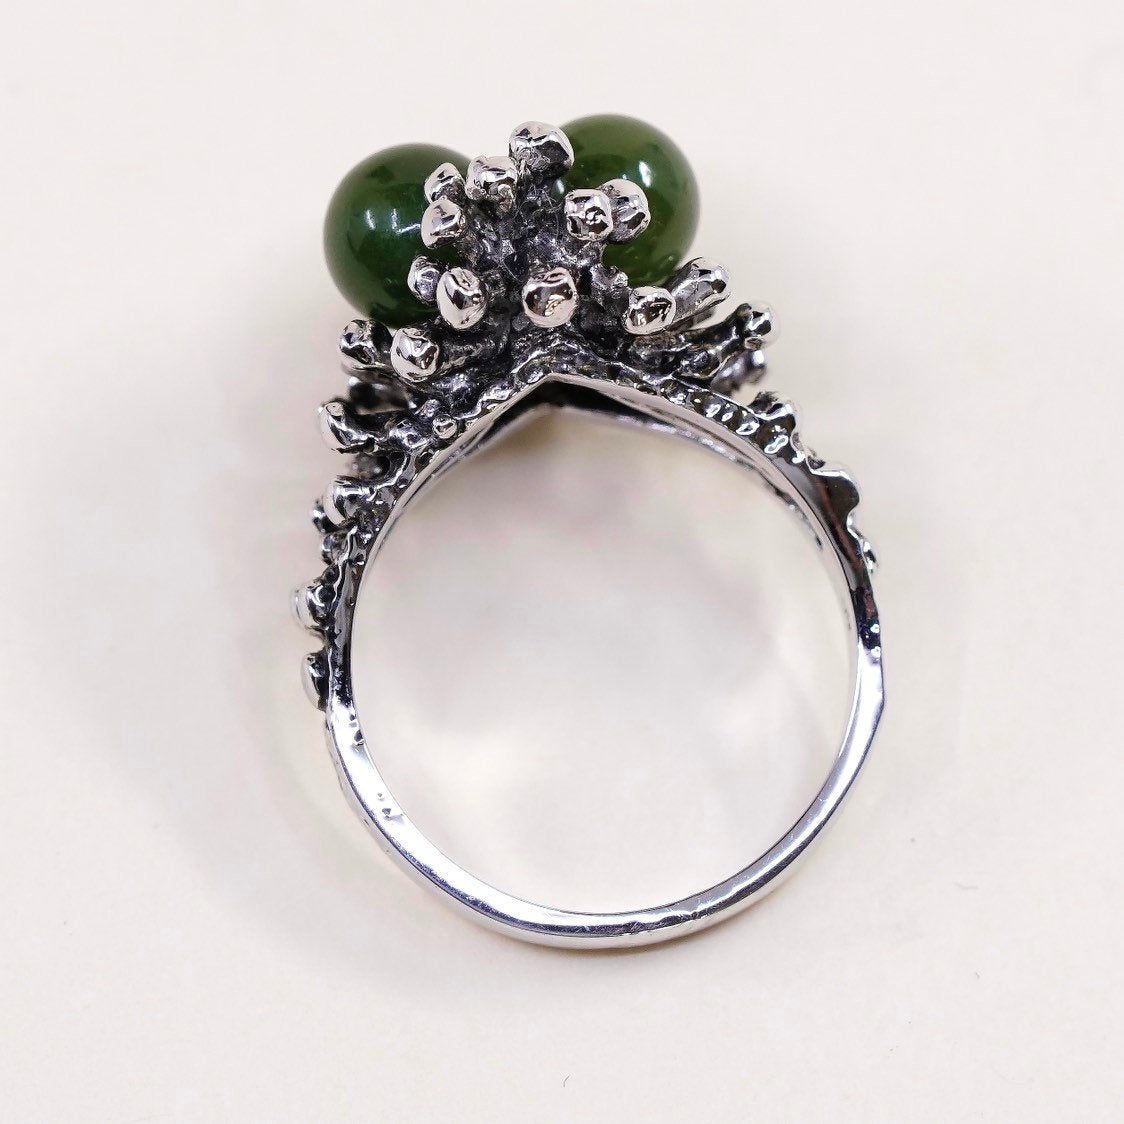 sz 5.25, vtg handmade sterling silver statement ring, unique beads w/ jade ring